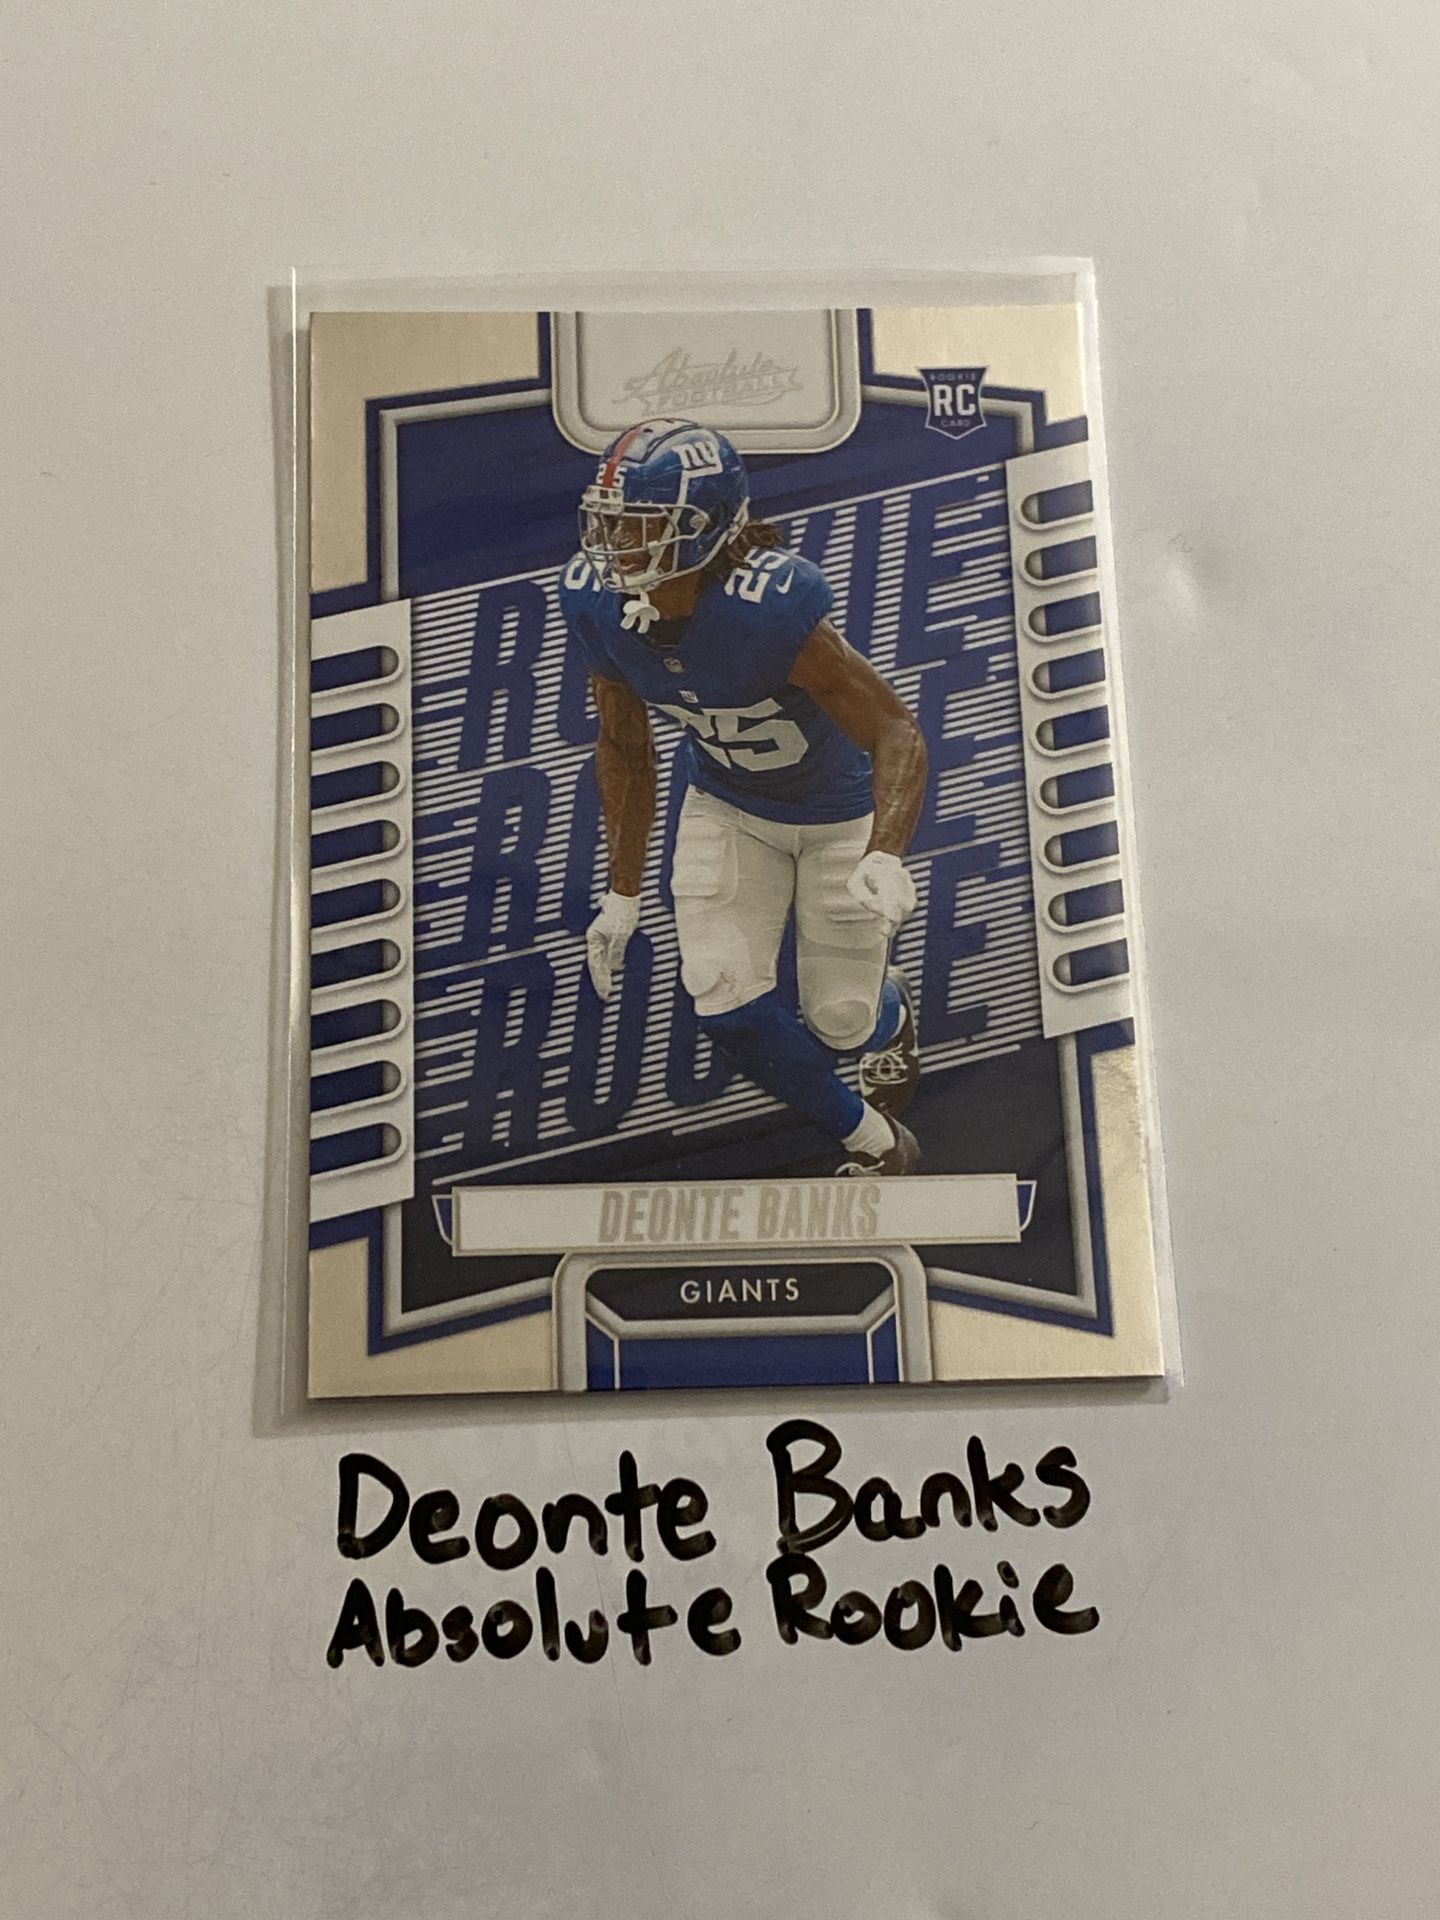 Deonte Banks New York Giants CB Absolute Rookie Card. 